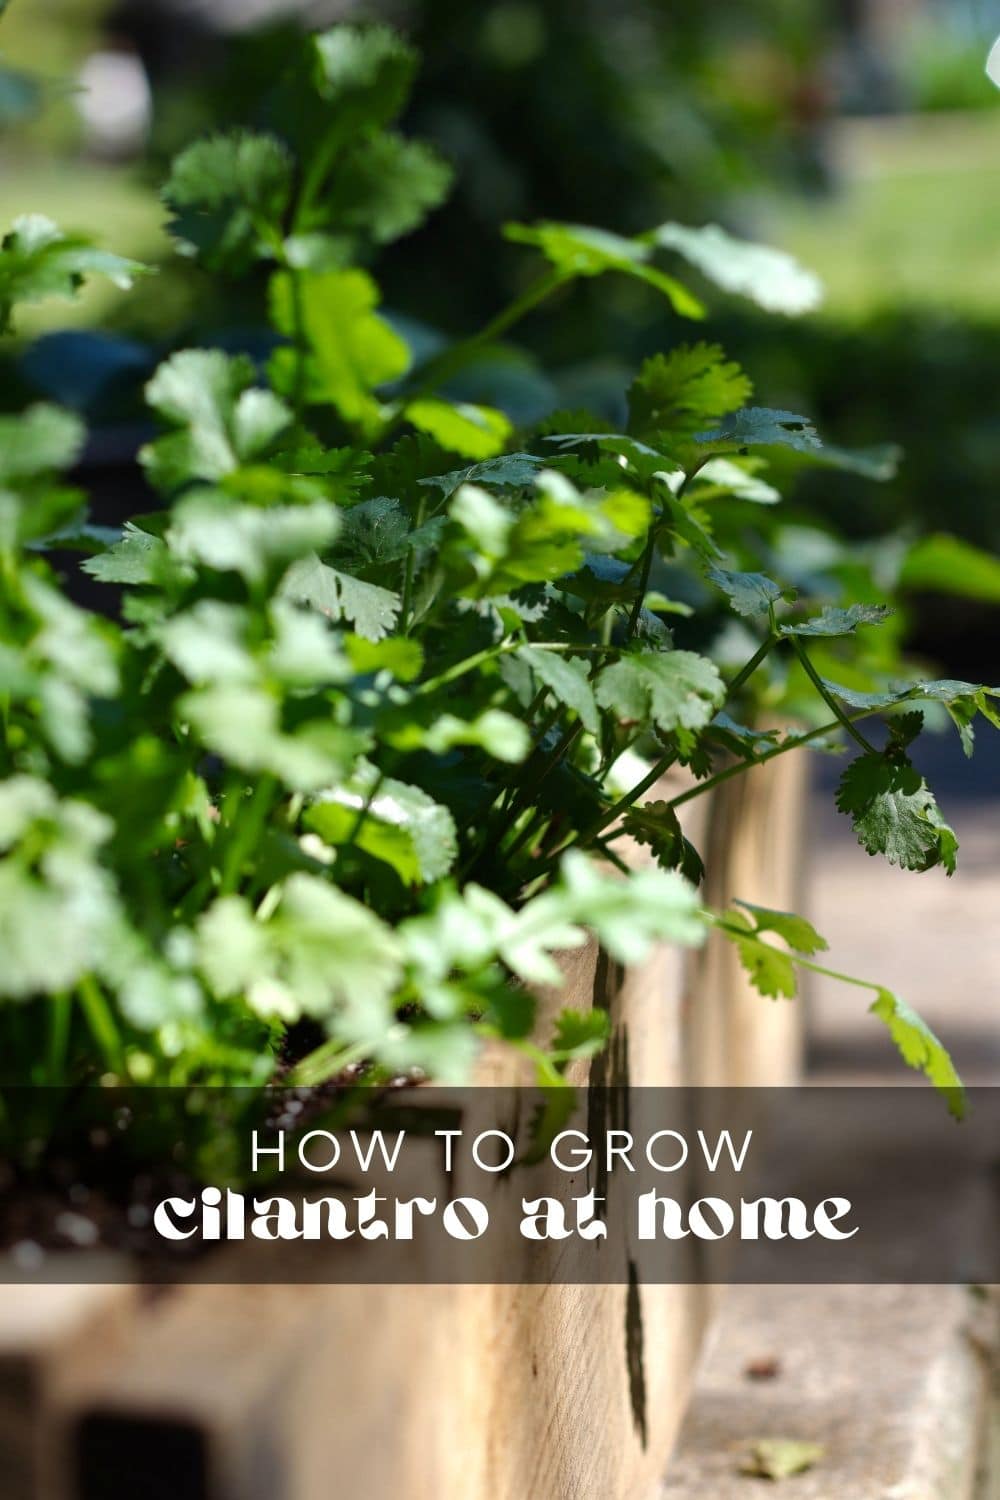 Whether you love or hate it, cilantro is one of the best herbs to grow at home! If you love the citrusy, peppery flavor of cilantro, you're in for a treat. It's so easy to grow and takes no time at all. Before you know it, you'll have an endless supply of fresh cilantro to use in your cooking.